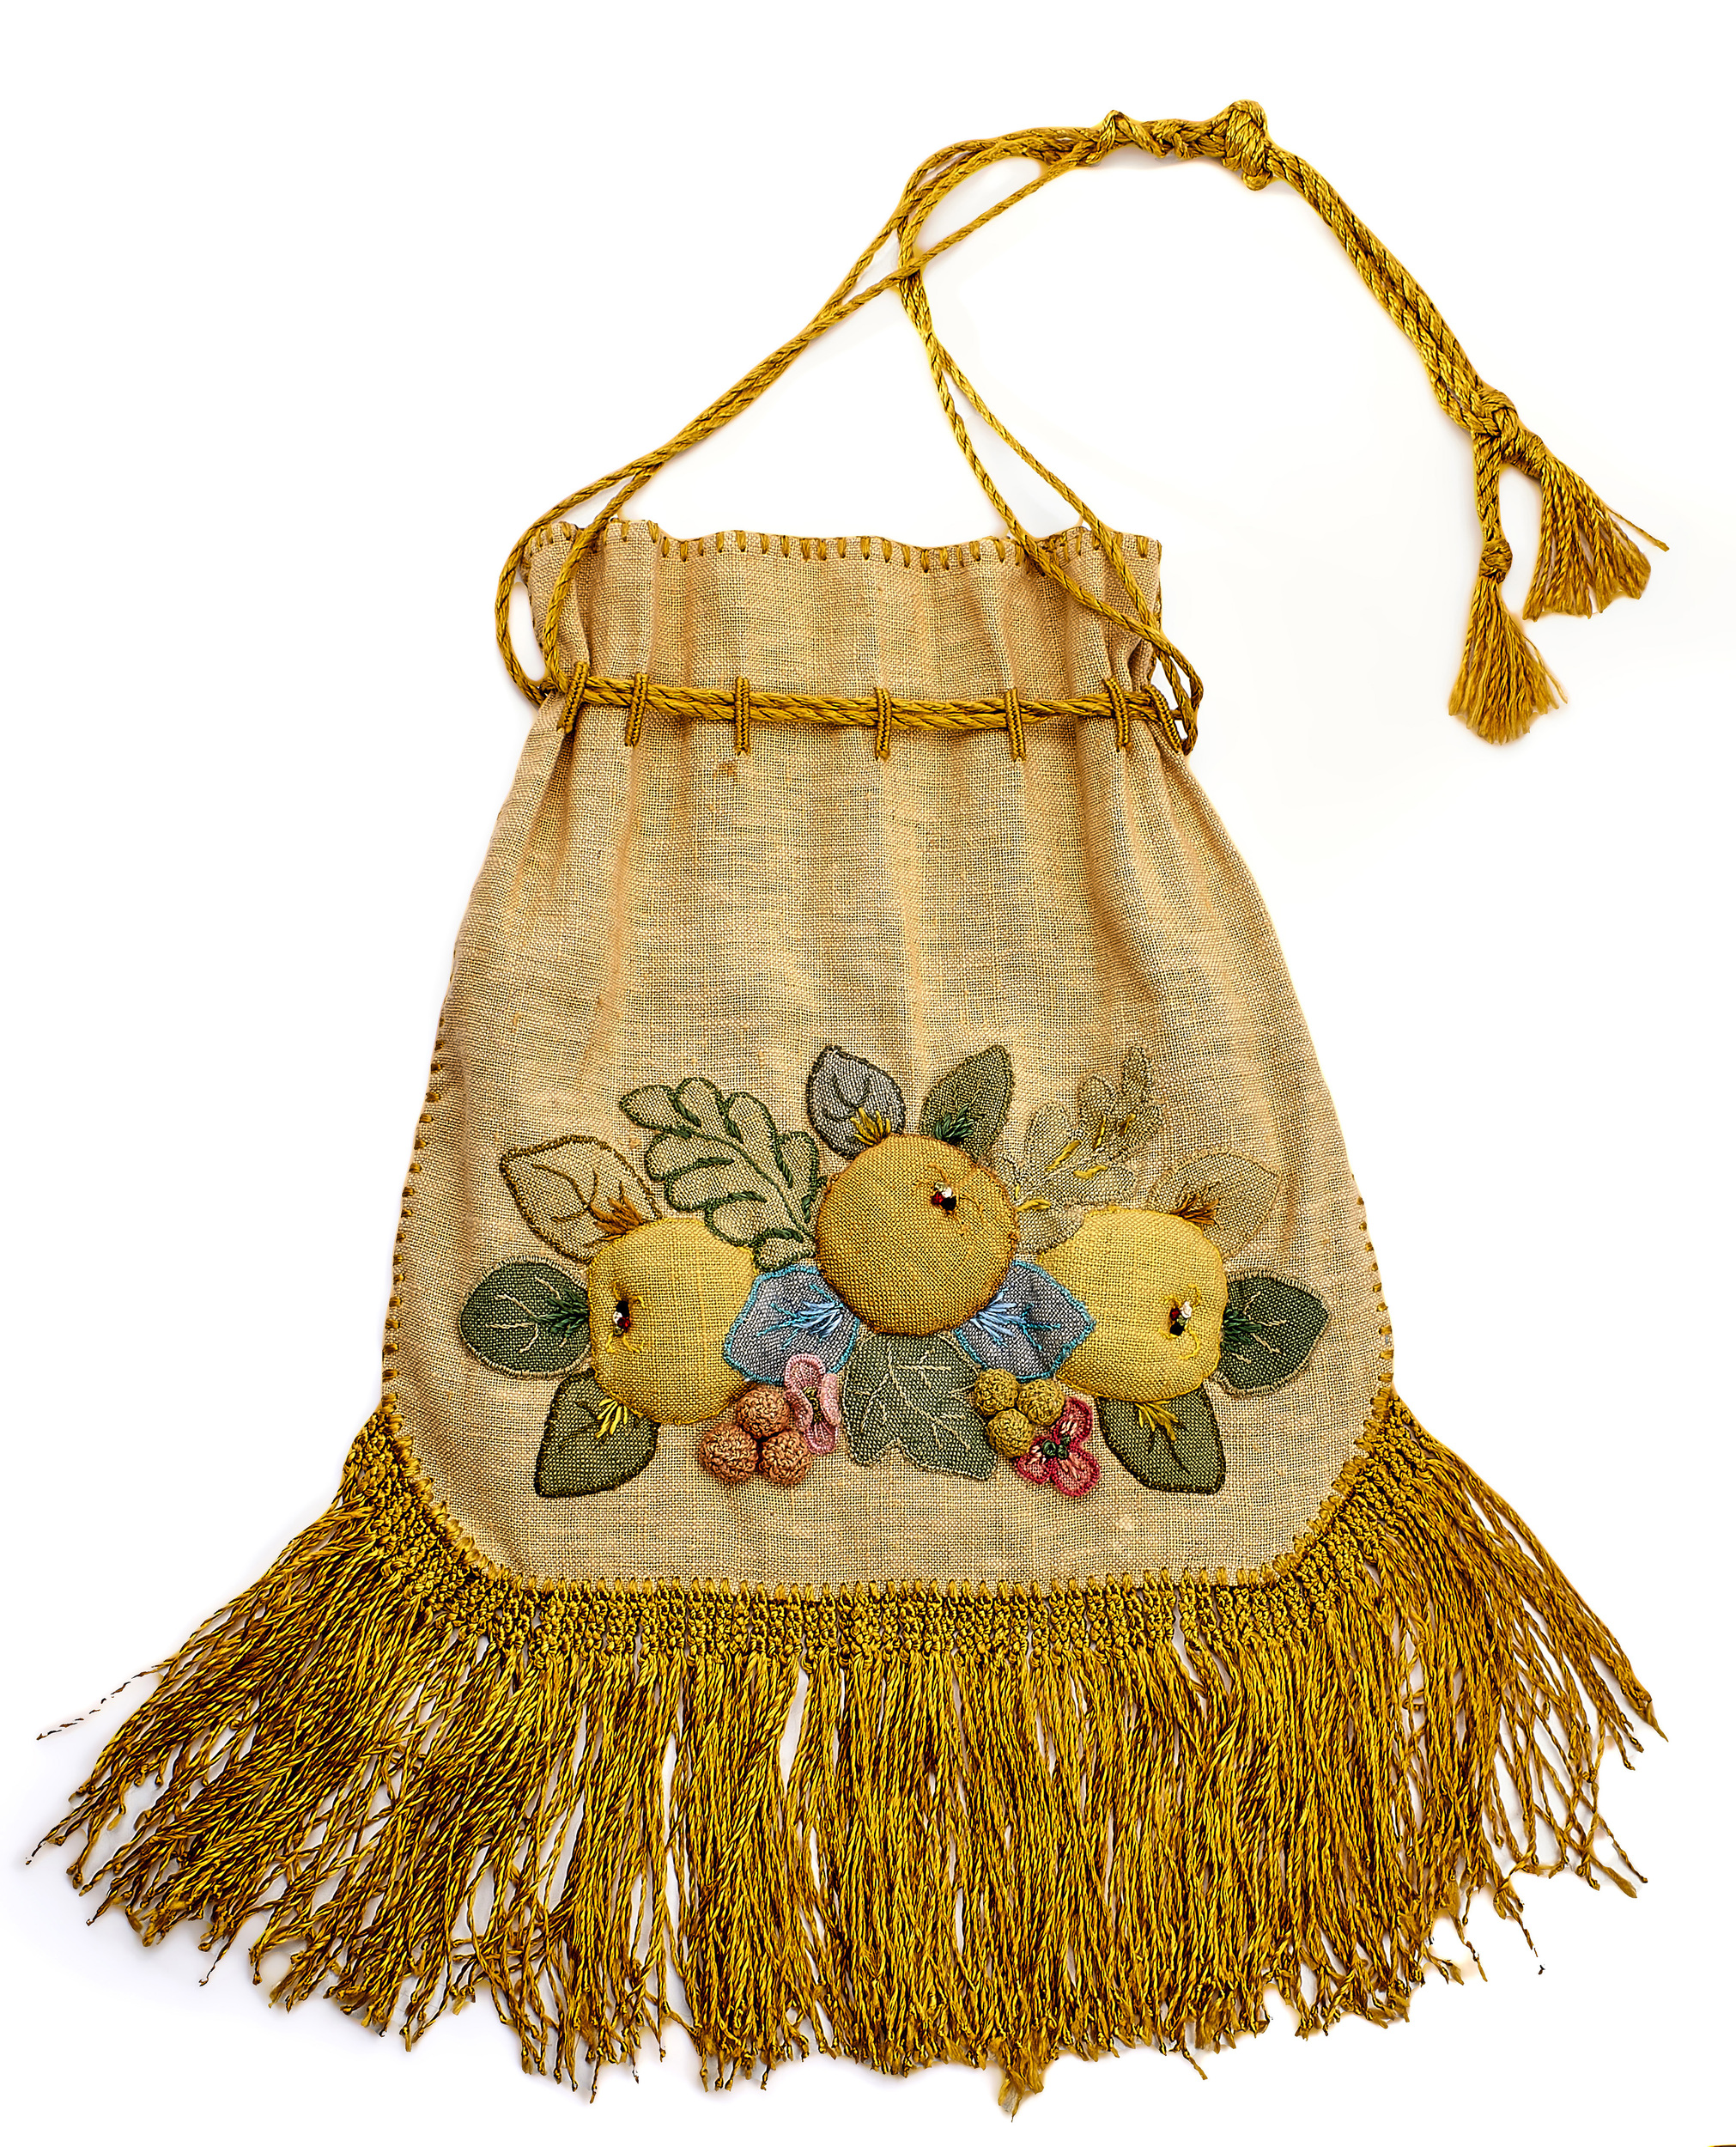 Arts and Crafts drawstring bag | Treadway Gallery